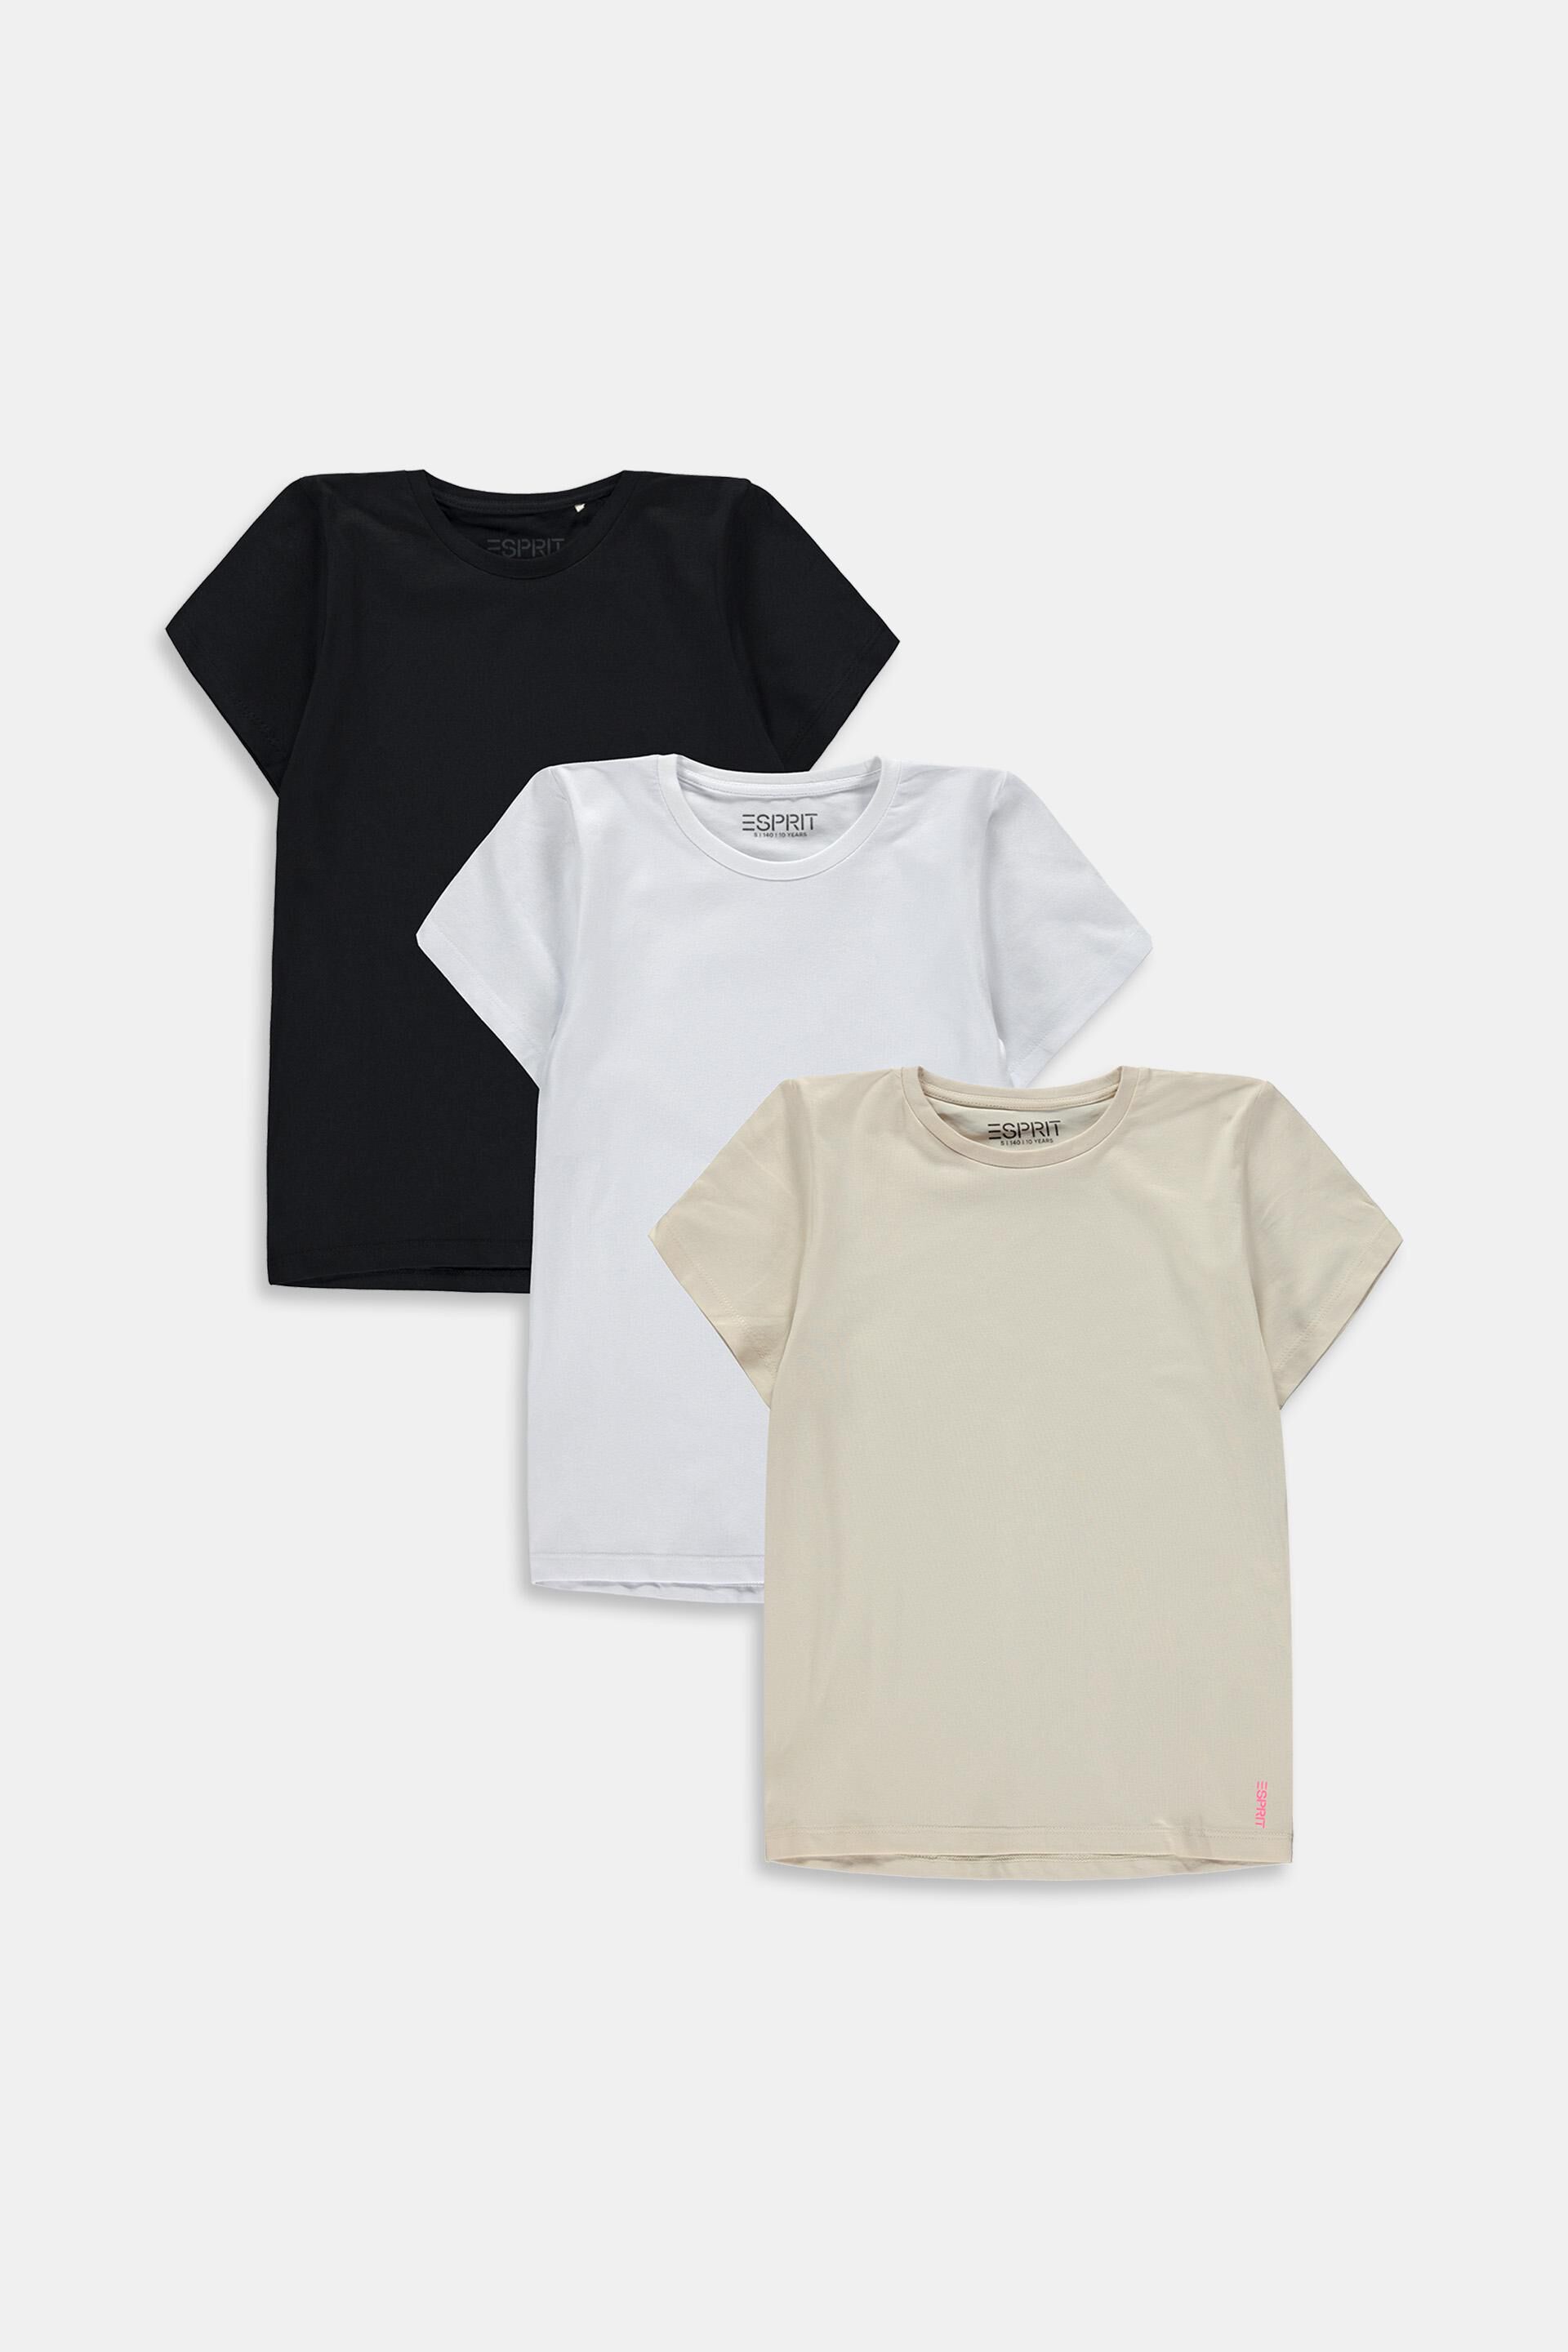 Esprit t-shirts 3-pack of